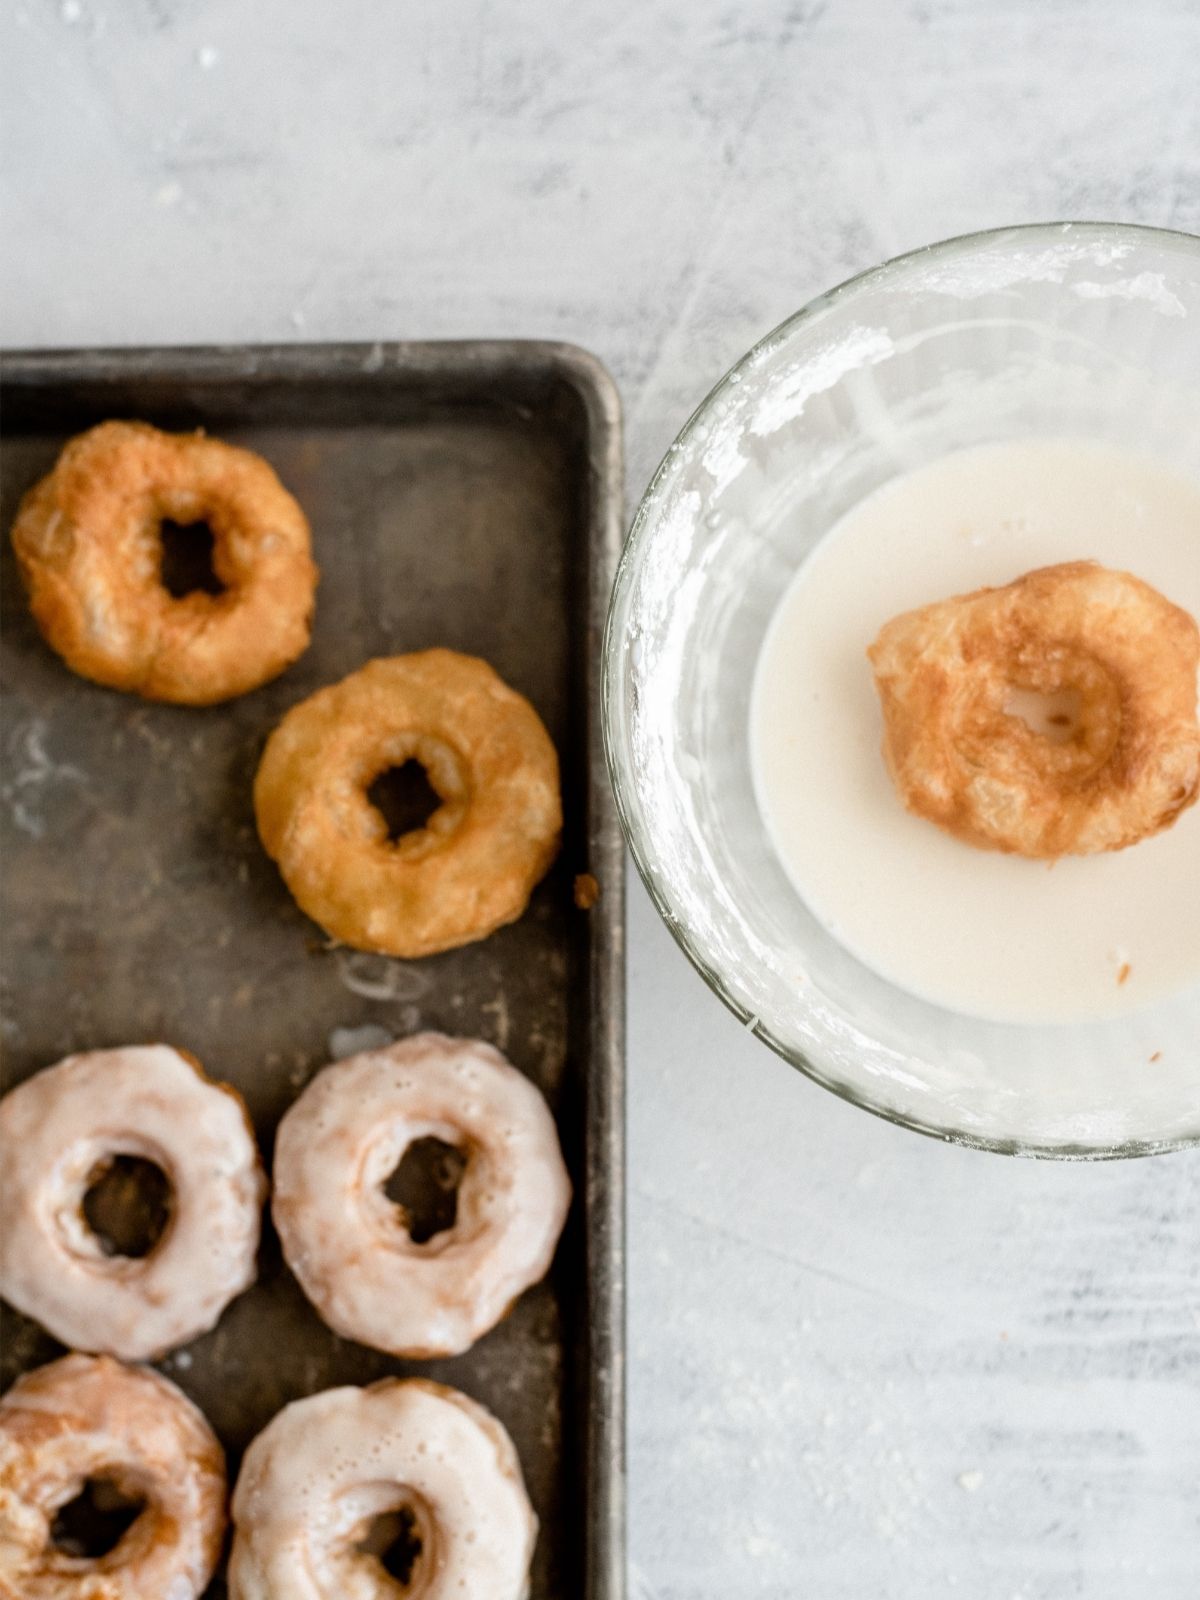 unglazed donuts and glazed donuts on baking sheets